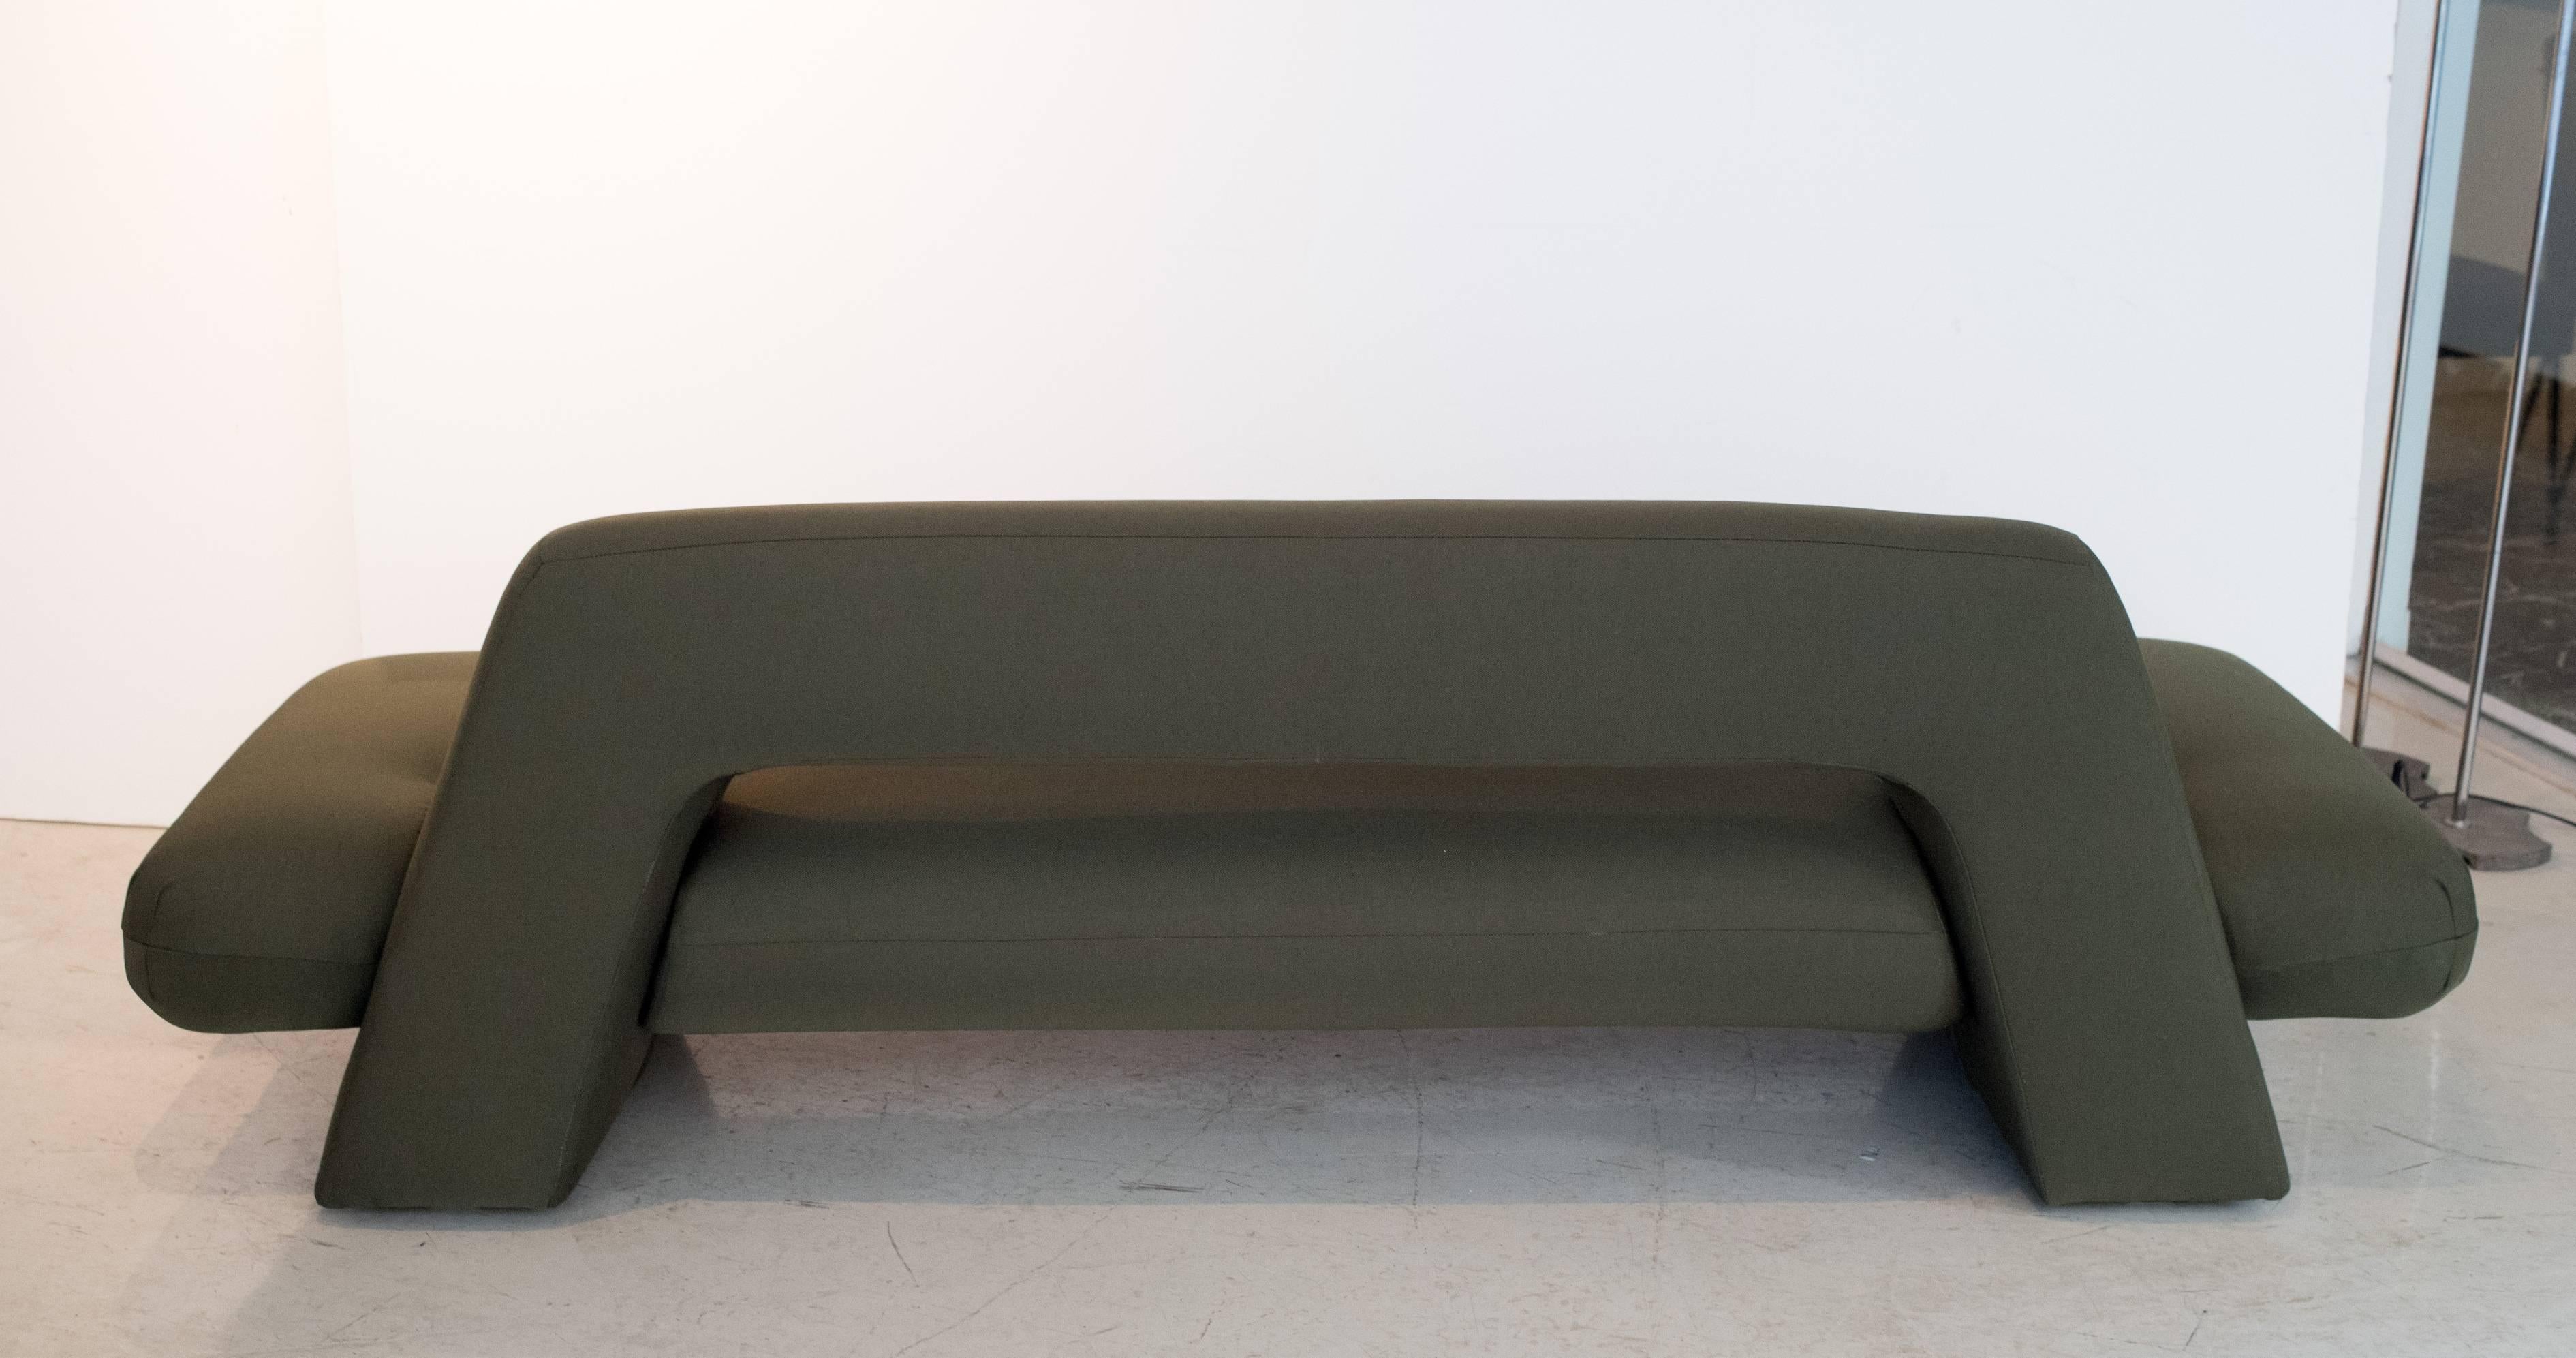 Clean, crisp lines are the trademark of this beautifully reupholstered Mayan sofa. The sofa is completely redone in a gorgeous olive fabric. The fabric has the most delicate subtle sheen to it. This is a vintage piece from 1983 that has been